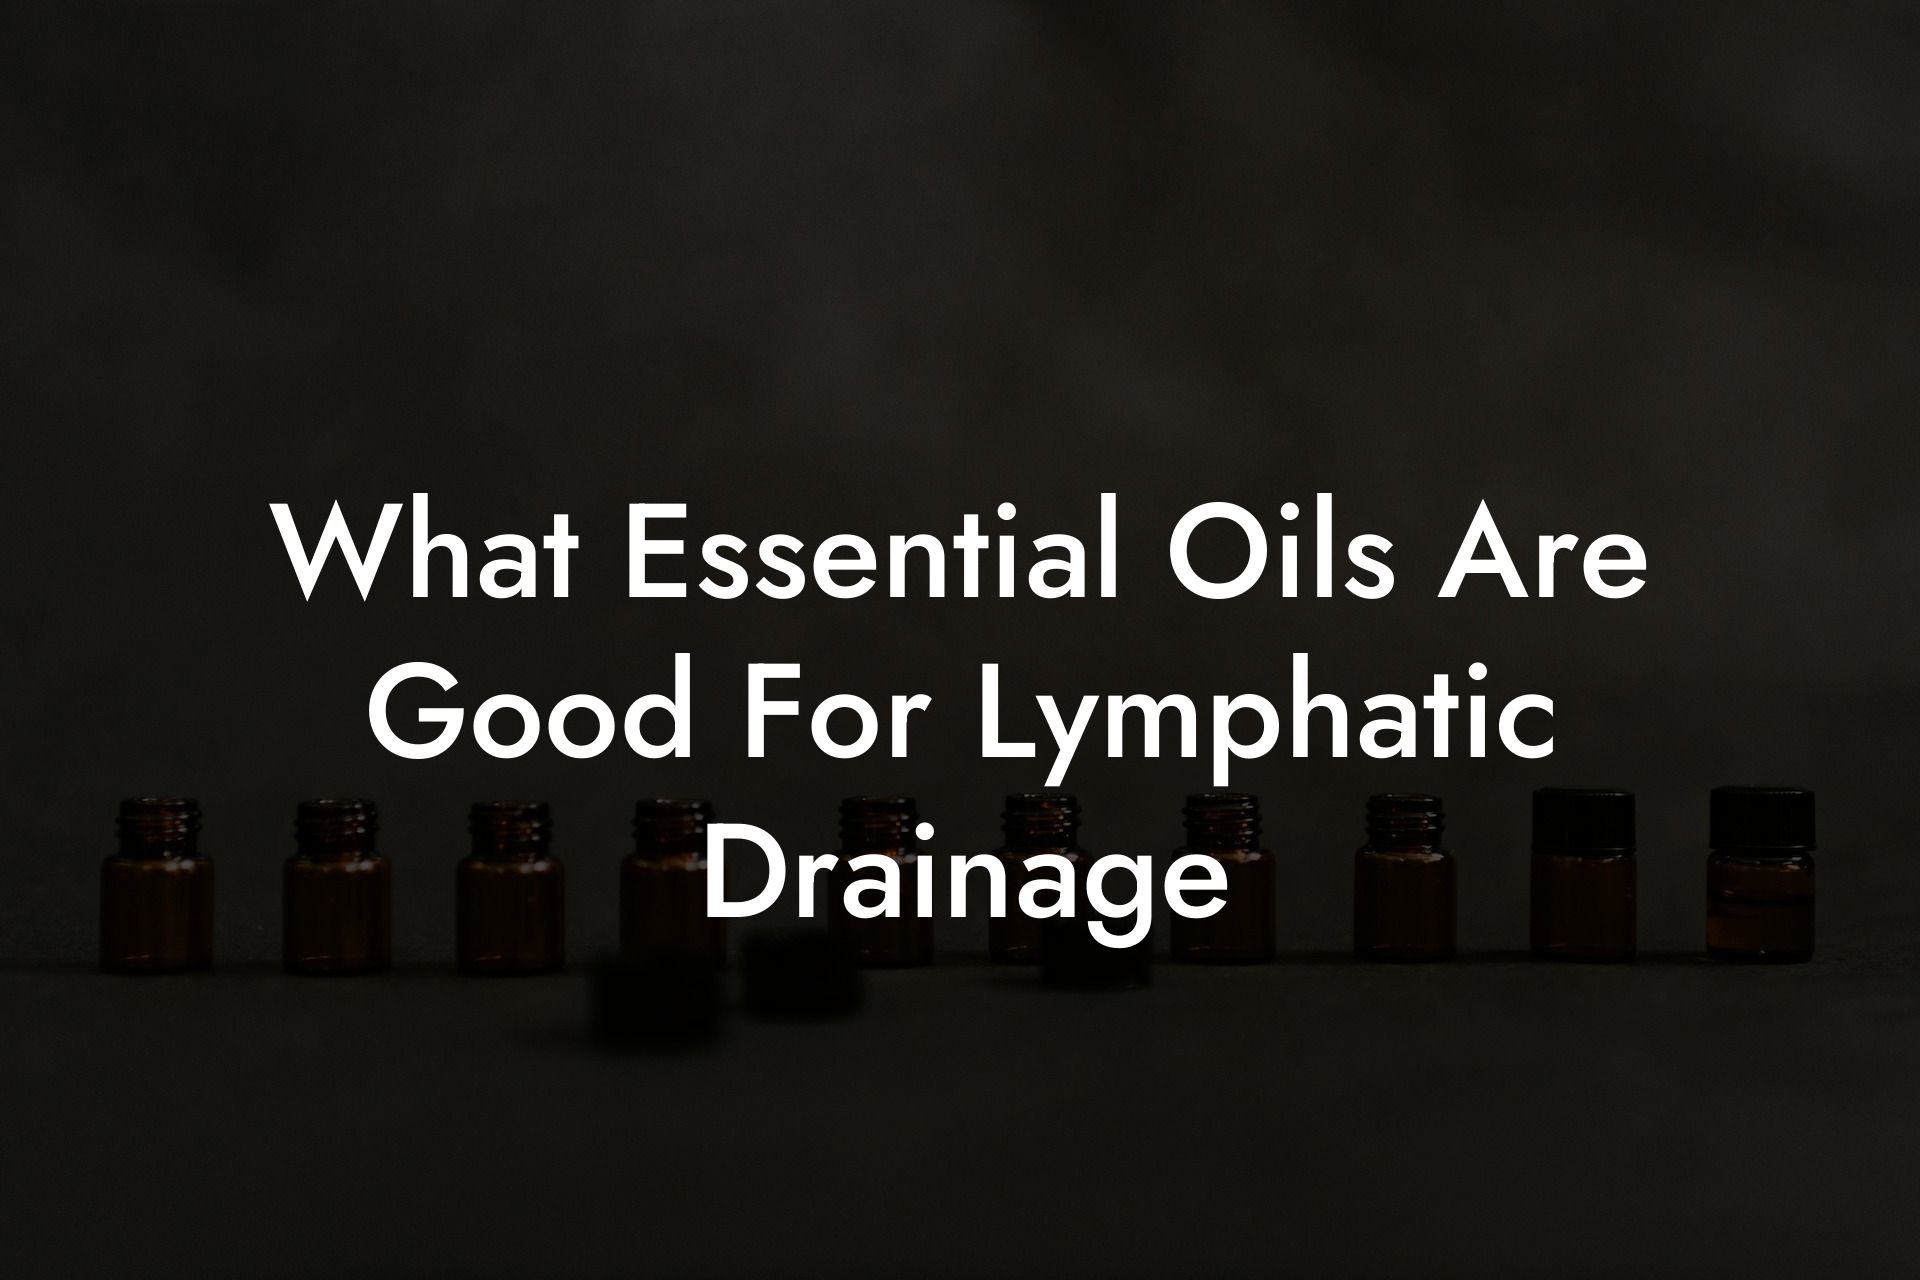 What Essential Oils Are Good For Lymphatic Drainage